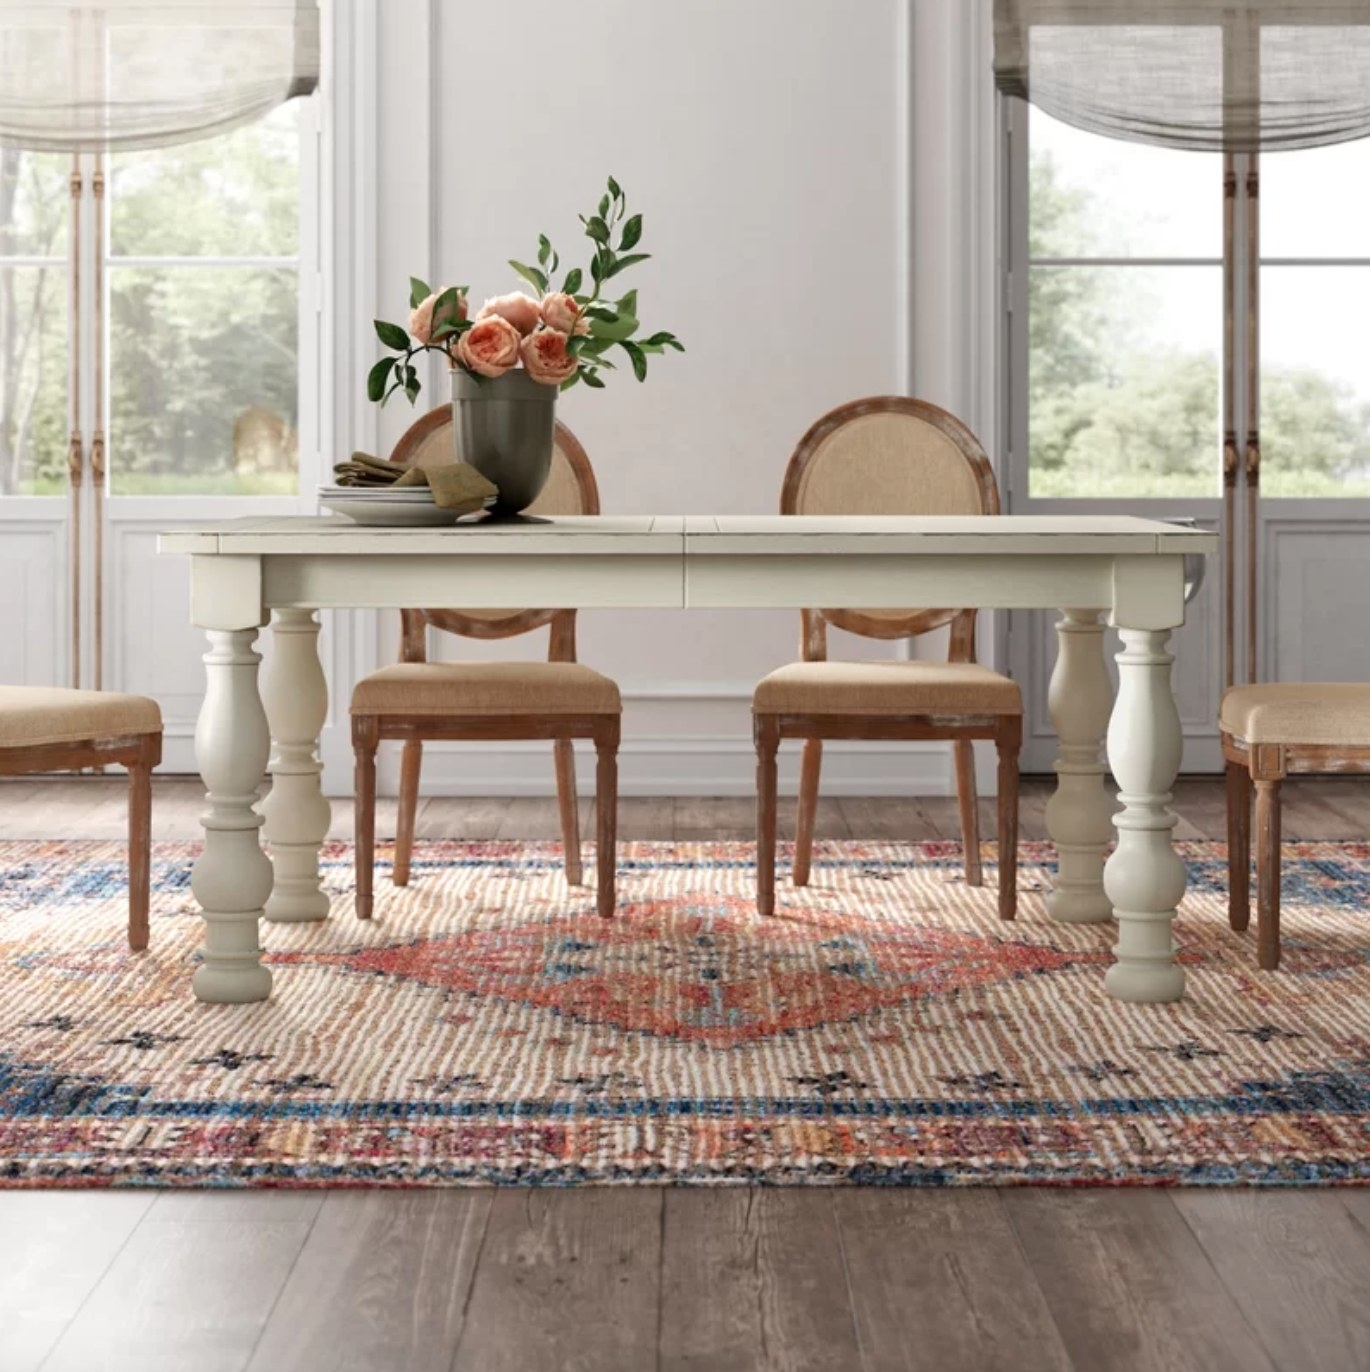 The extendable dining table in white holding a vase of flowers